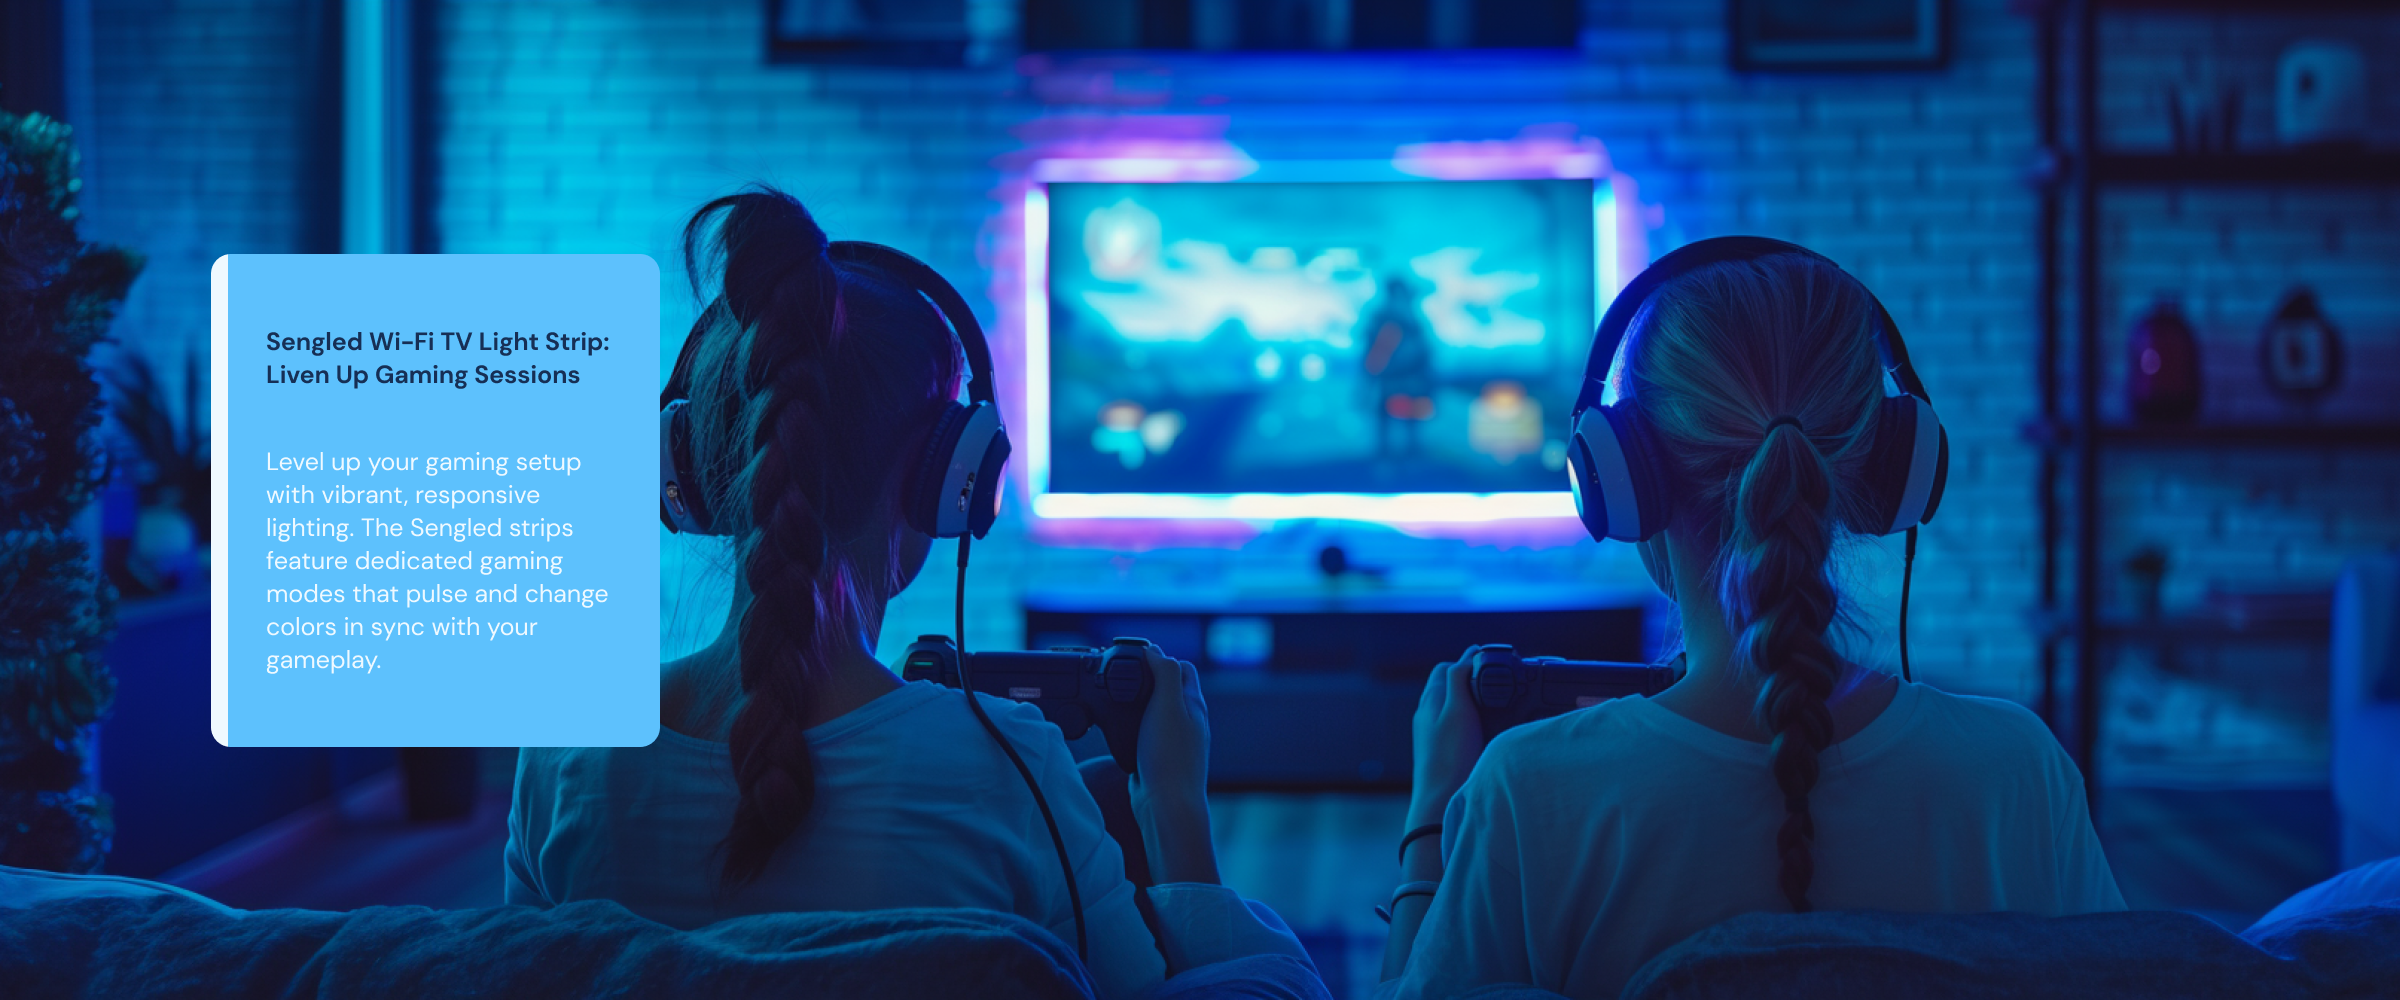 Liven Up Gaming Sessions Level up your gaming setup with vibrant, responsive lighting. The Sengled strips feature dedicated gaming modes that pulse and change colors in sync with your gameplay.